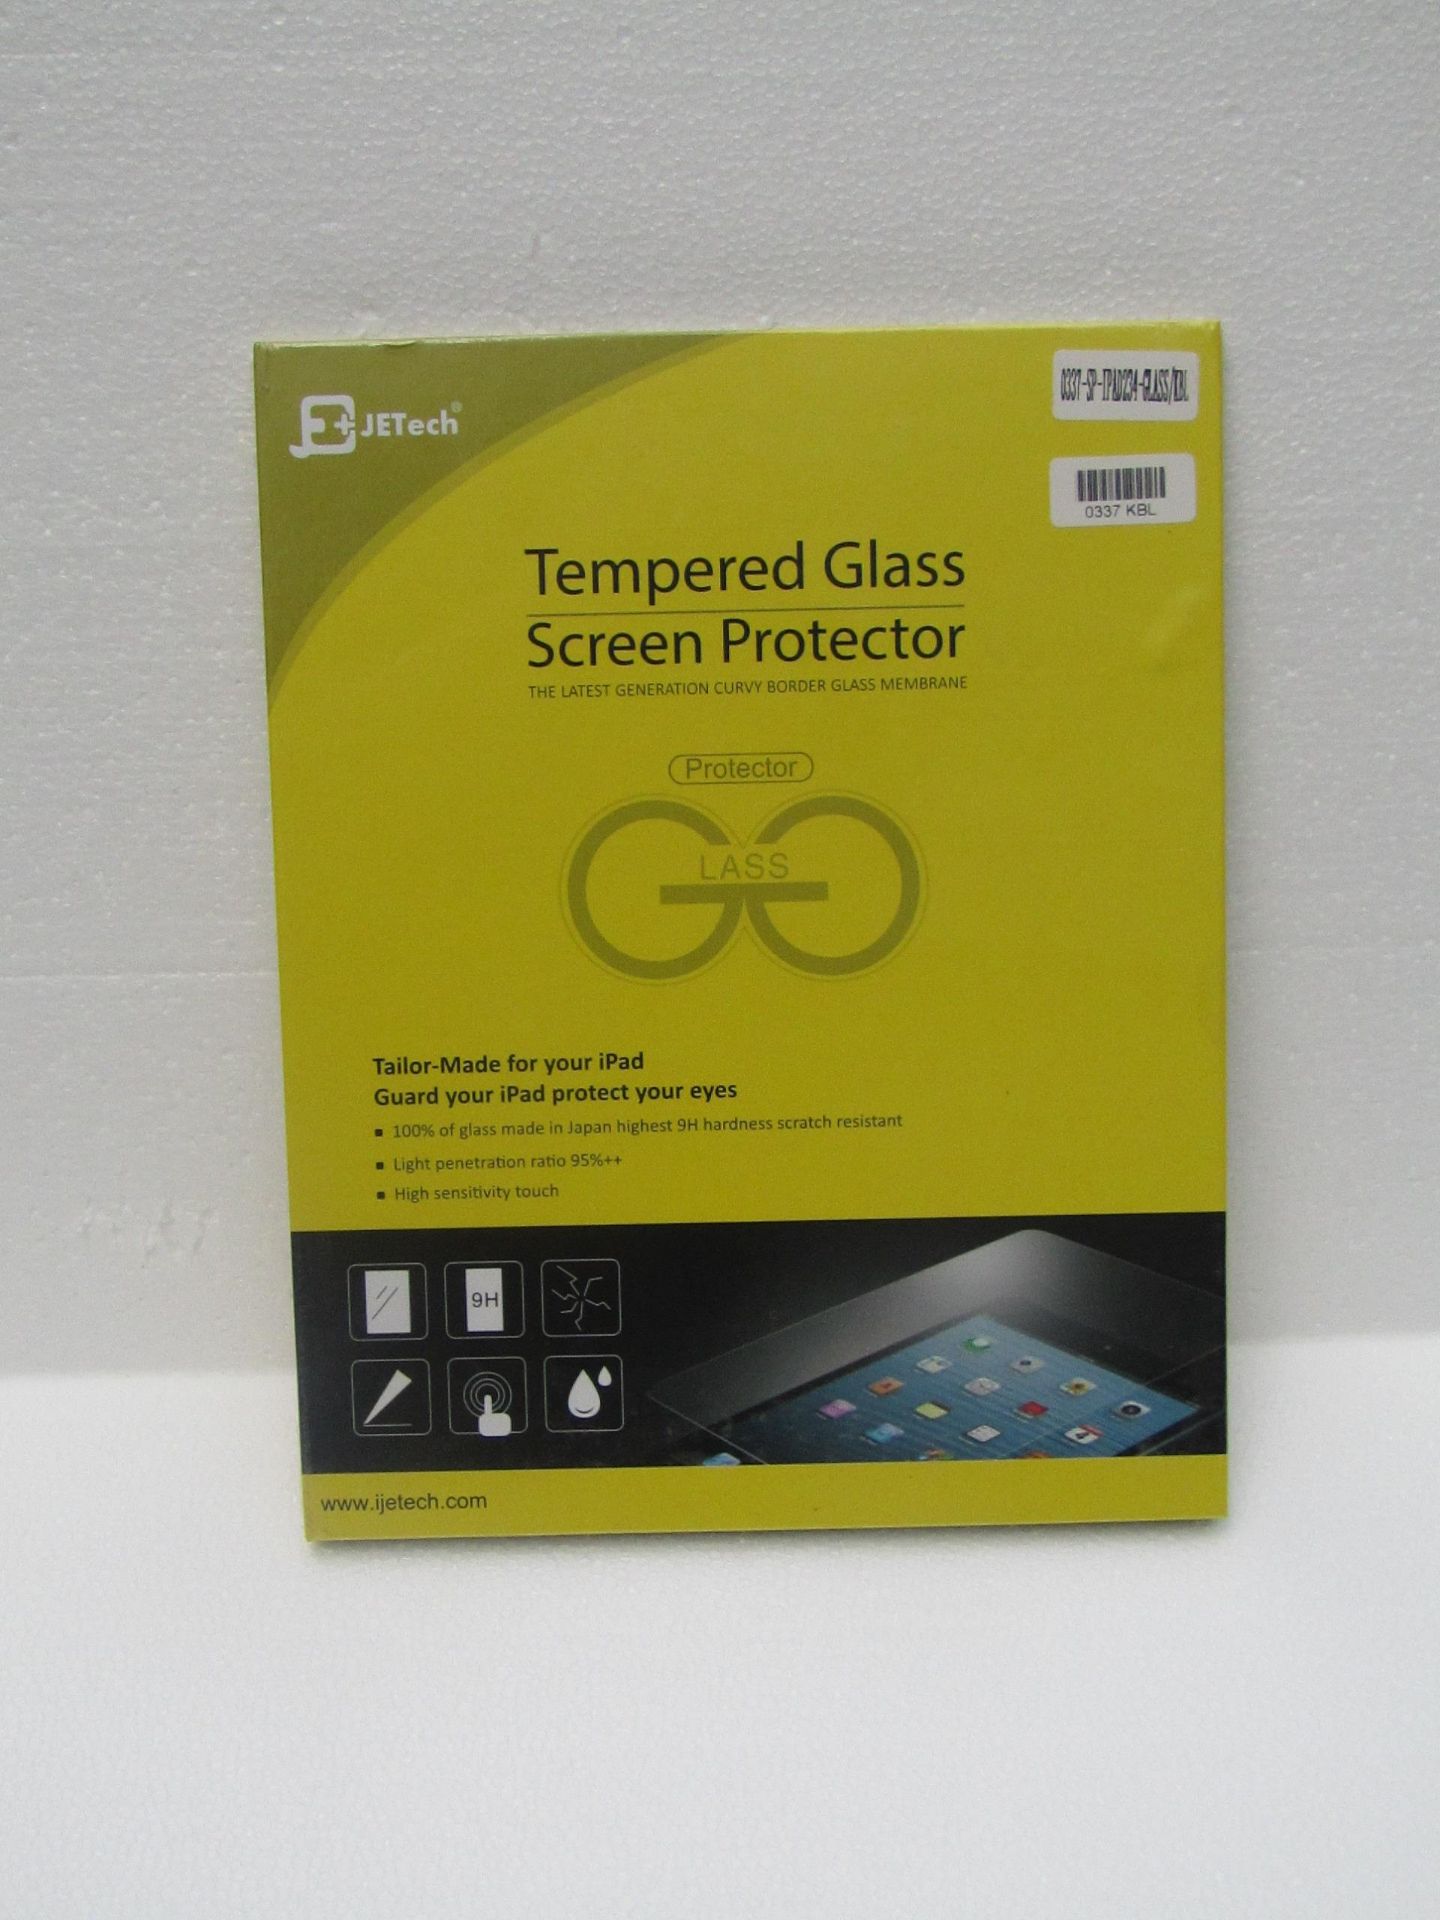 Jetech tempered glass screen protector for iPad, new and packaged.